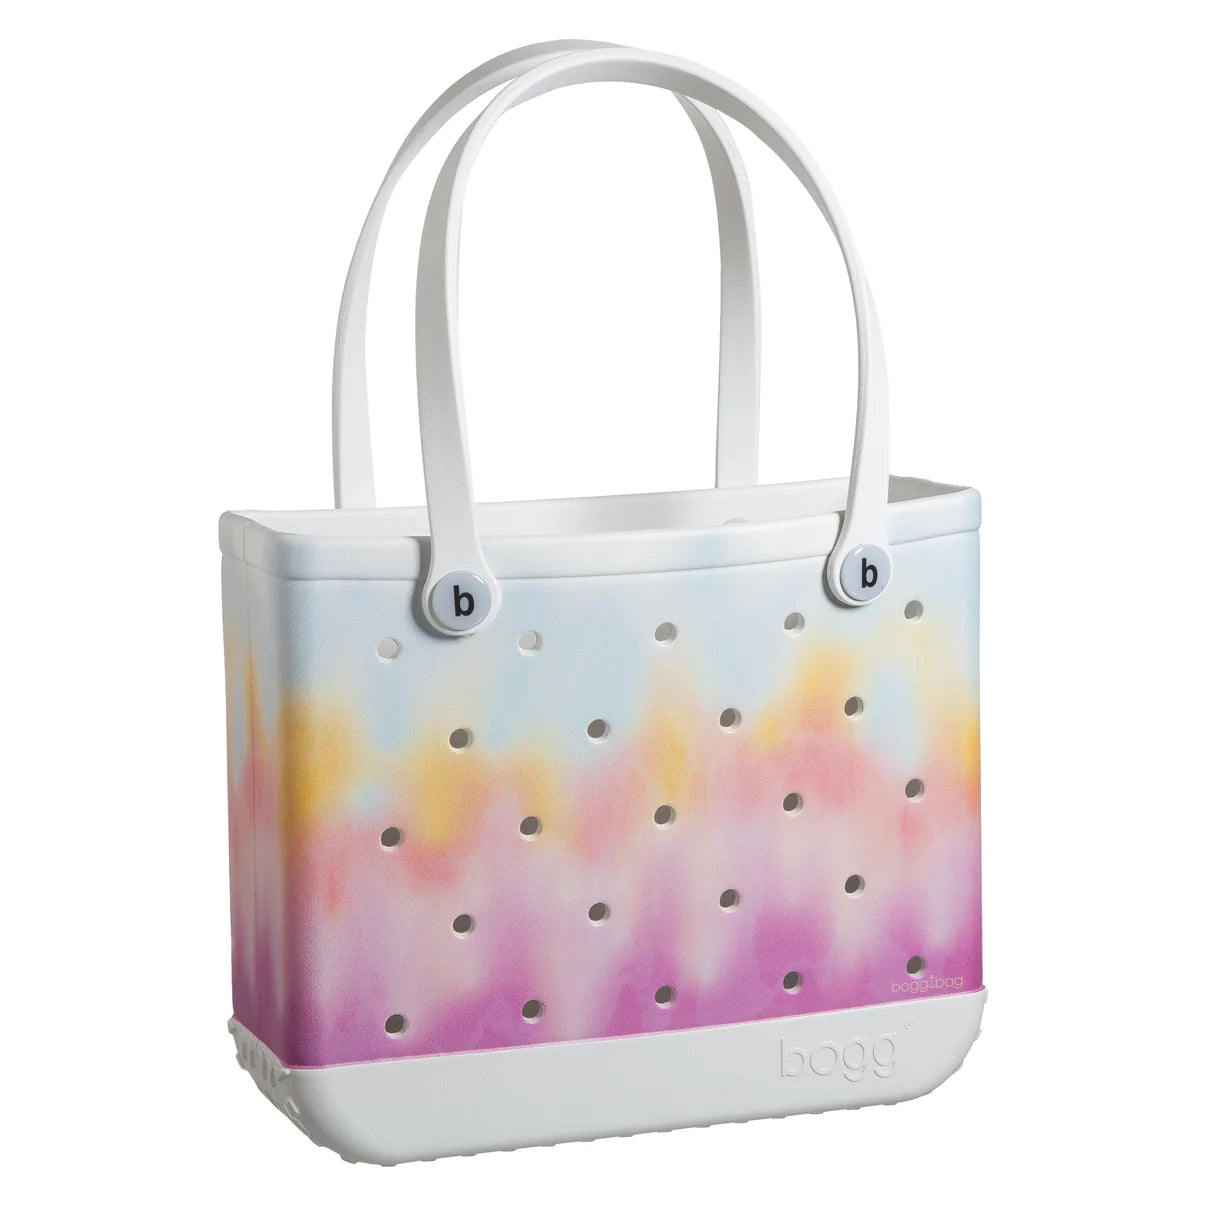 Bogg Bag Limited Edition Baby Bogg: Cotton Candy Tie Dye